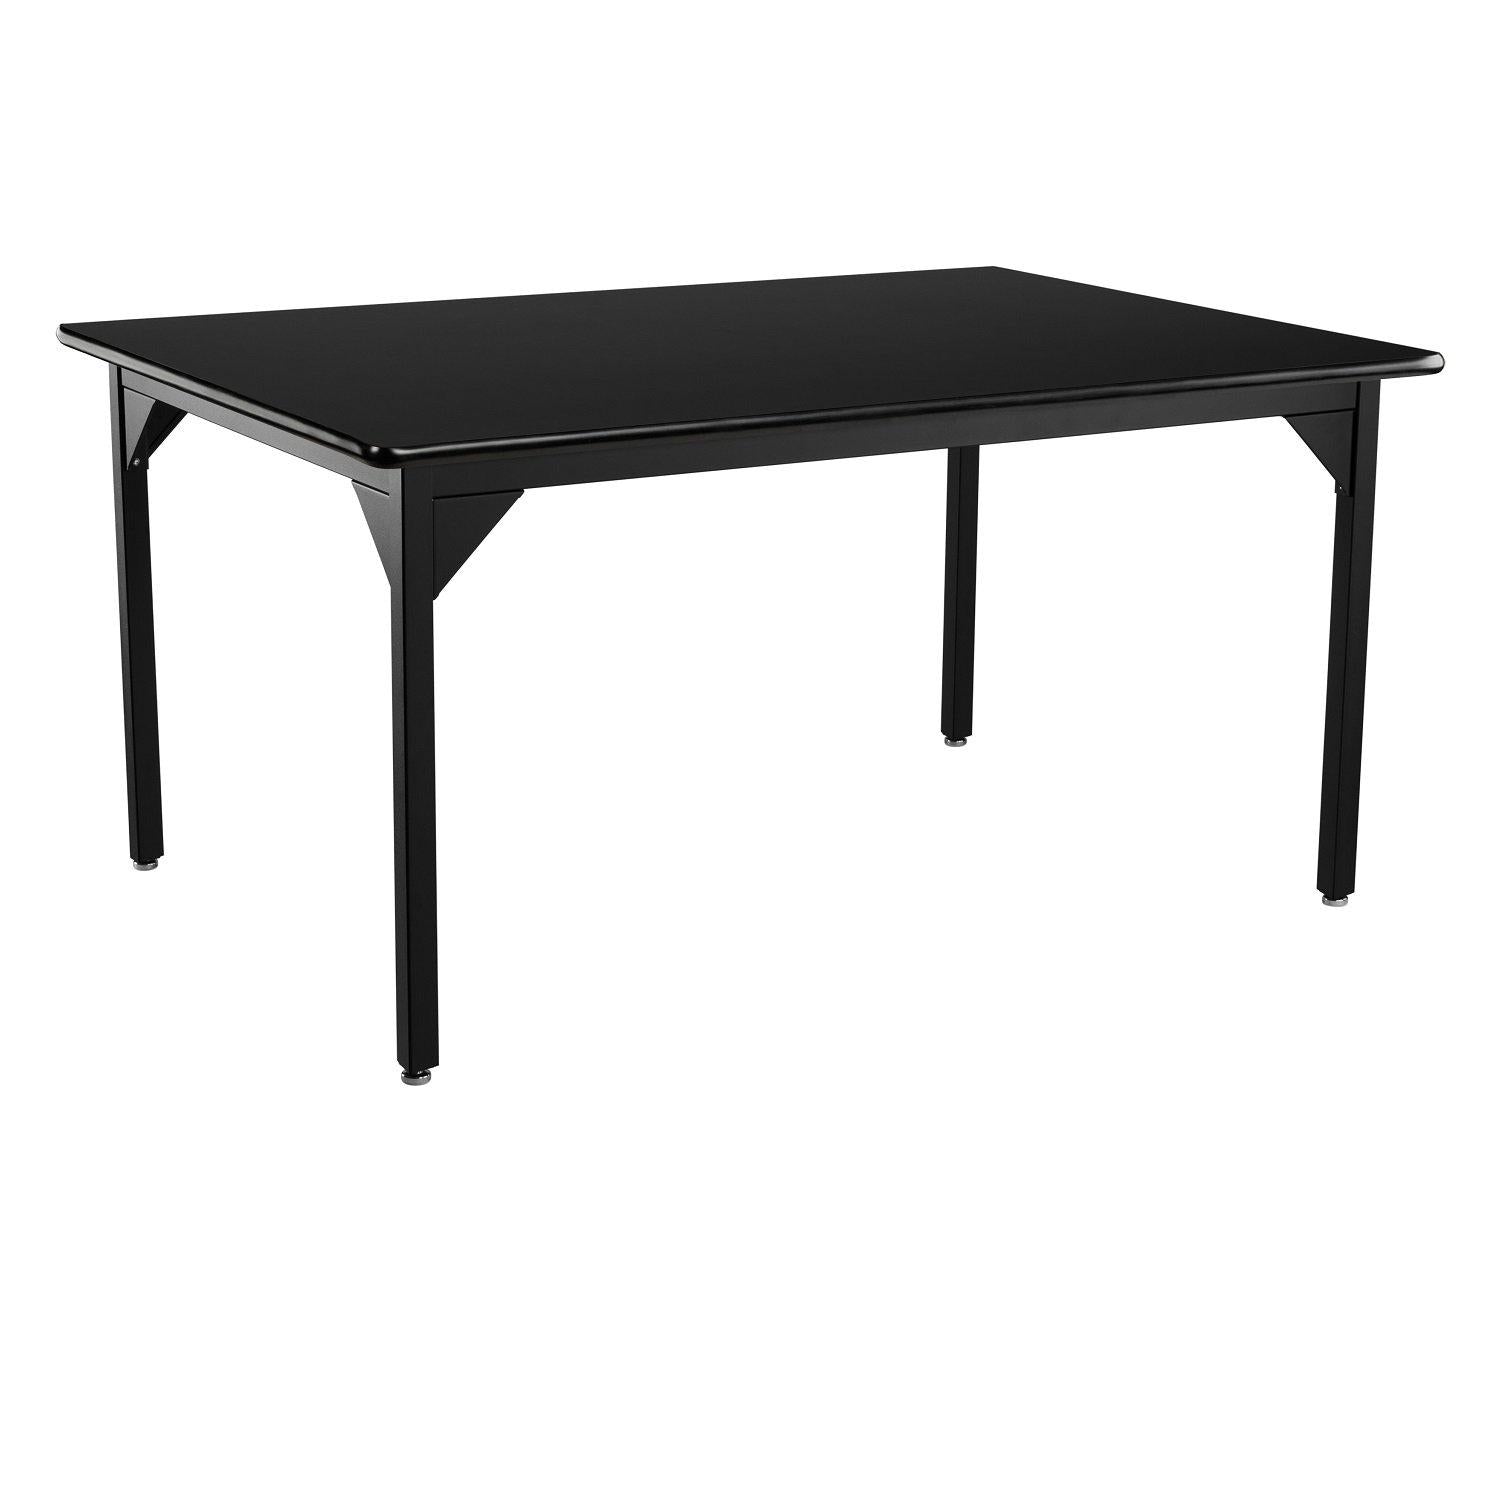 Heavy-Duty Fixed Height Utility Table, Black Frame, 48" x 60", High-Pressure Laminate Top with T-Mold Edge